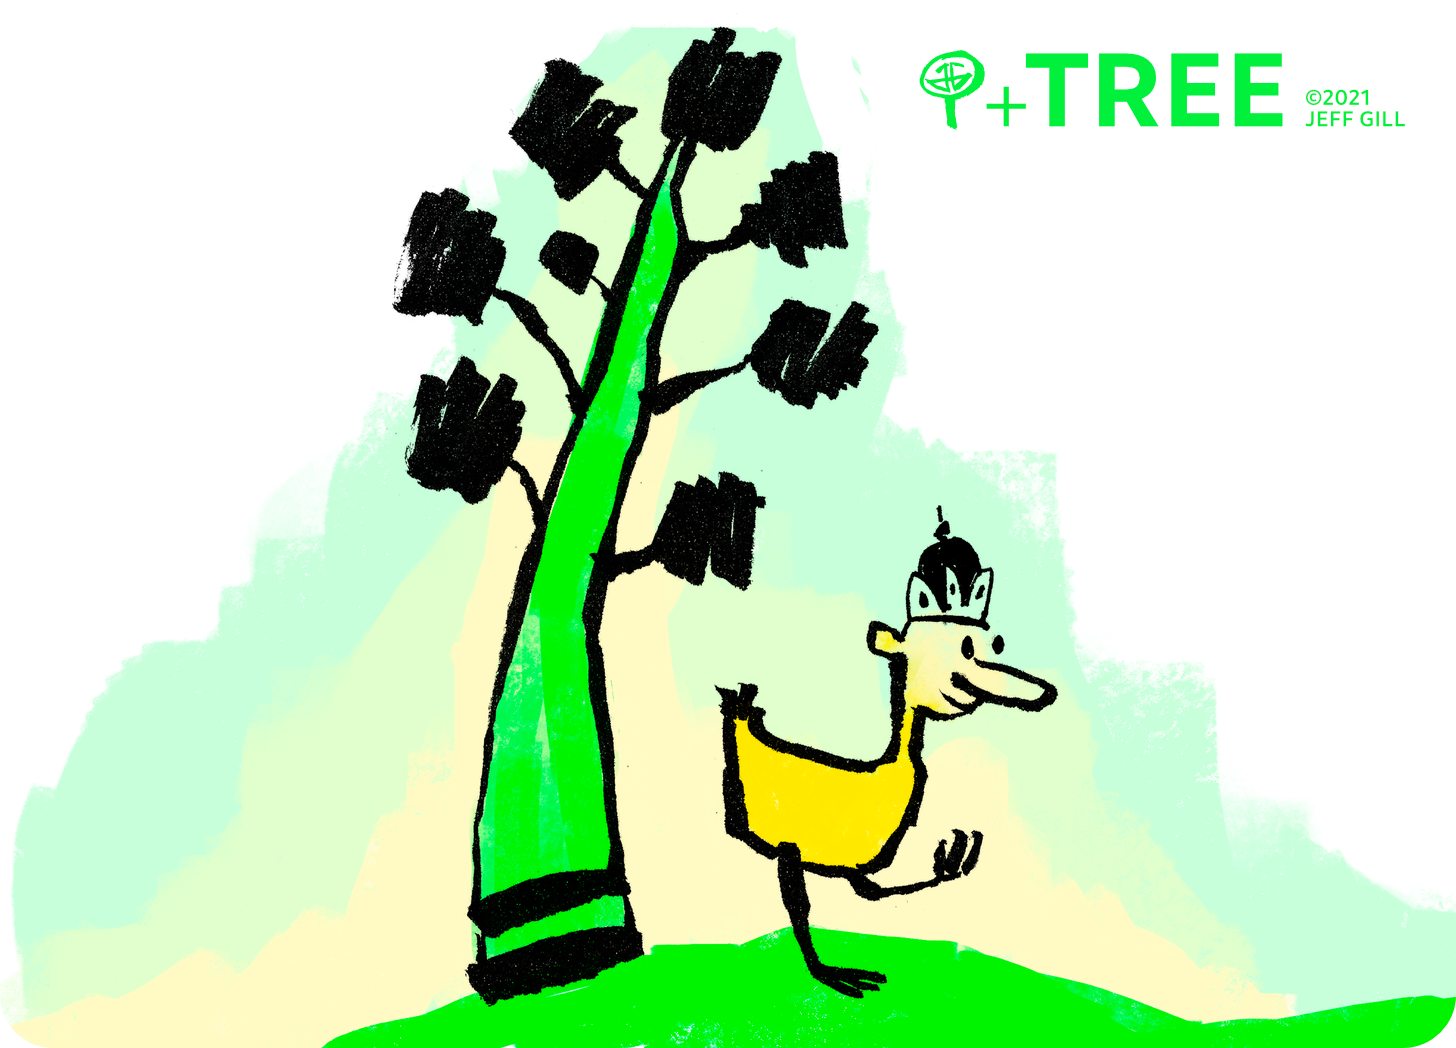 Illustration of a human-faced duck wearing a crown and walking near a tree